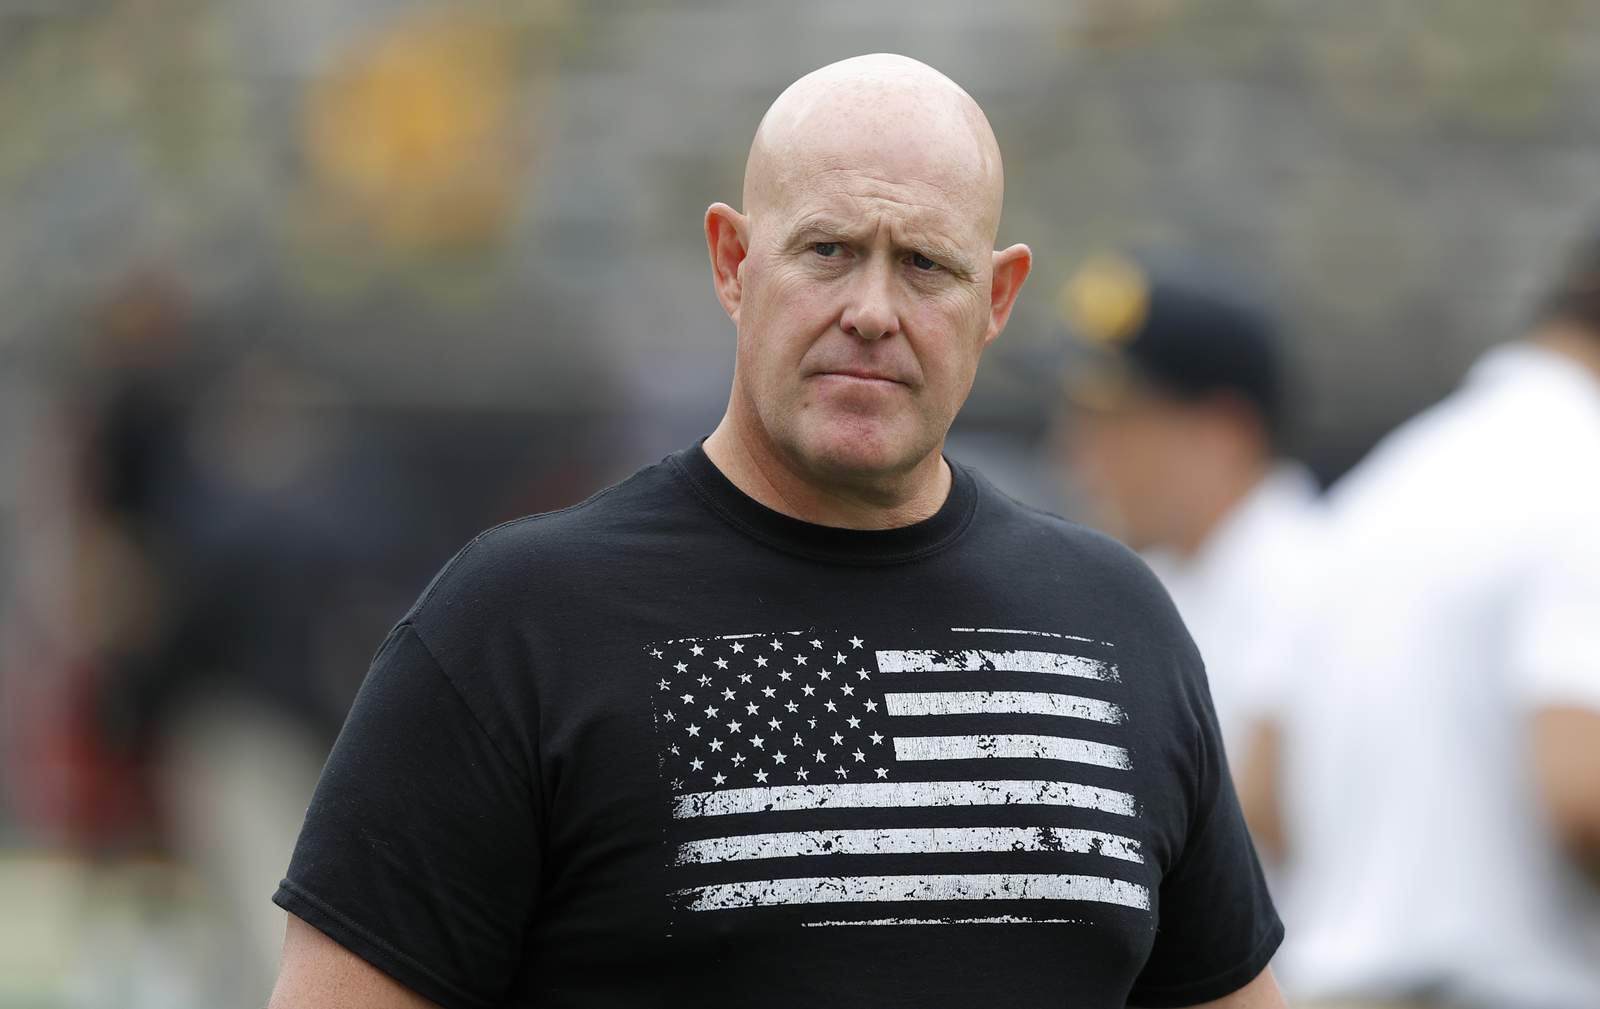 Doyle out as Iowa strength coach after mistreatment claims